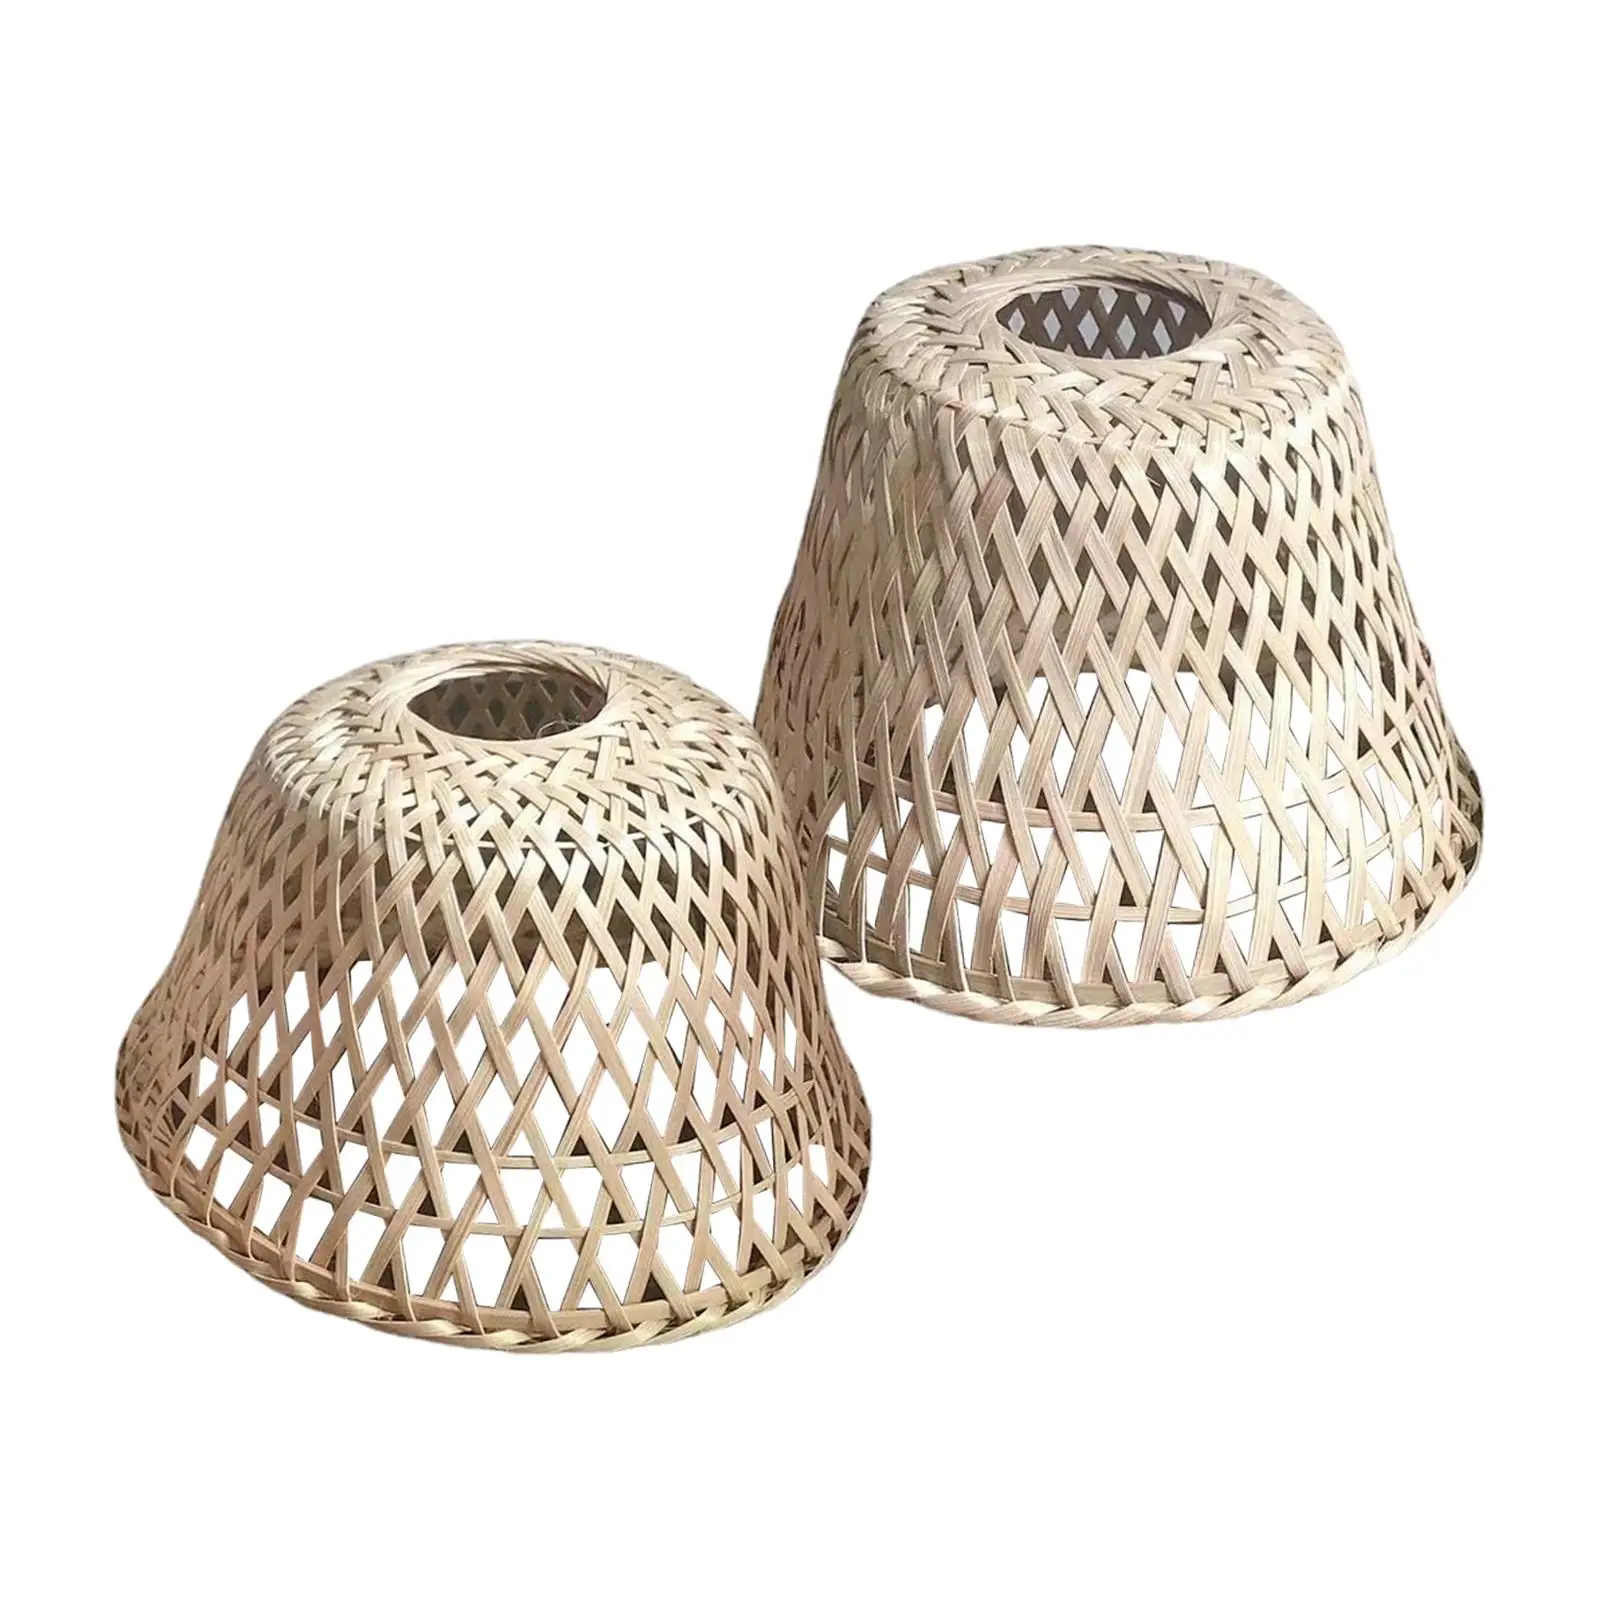 Retro Style Woven Bamboo Pendant Light Shade Chandelier Cover Dust Proof Premium Material